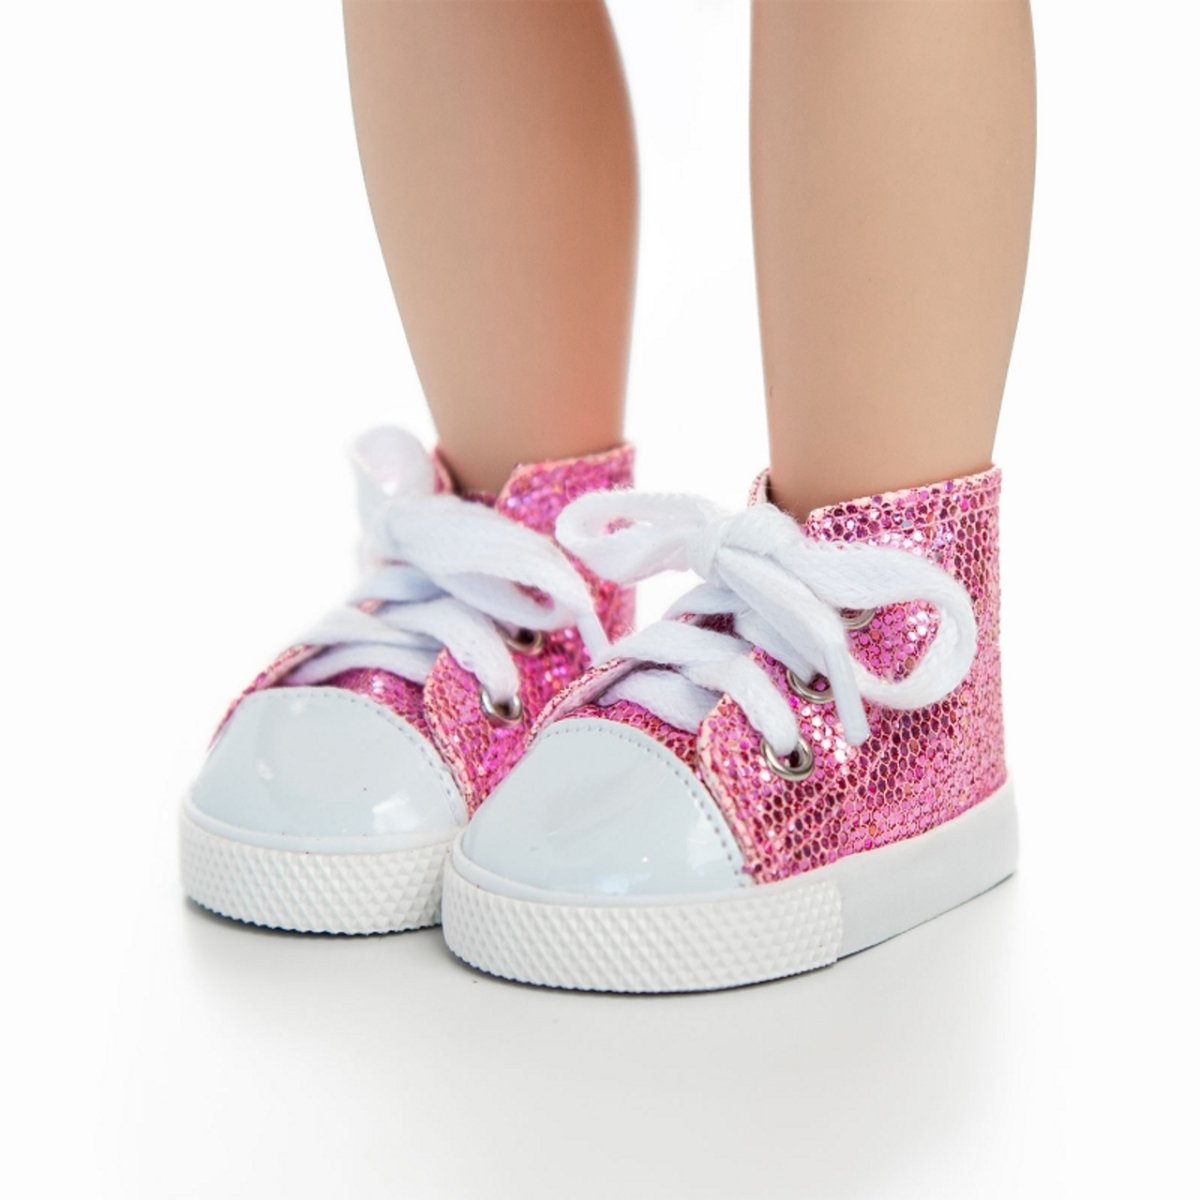 Queen's Treasures Sparkly Pink Sneakers and Shoe Box for 18" Dolls - Simon's Collectibles